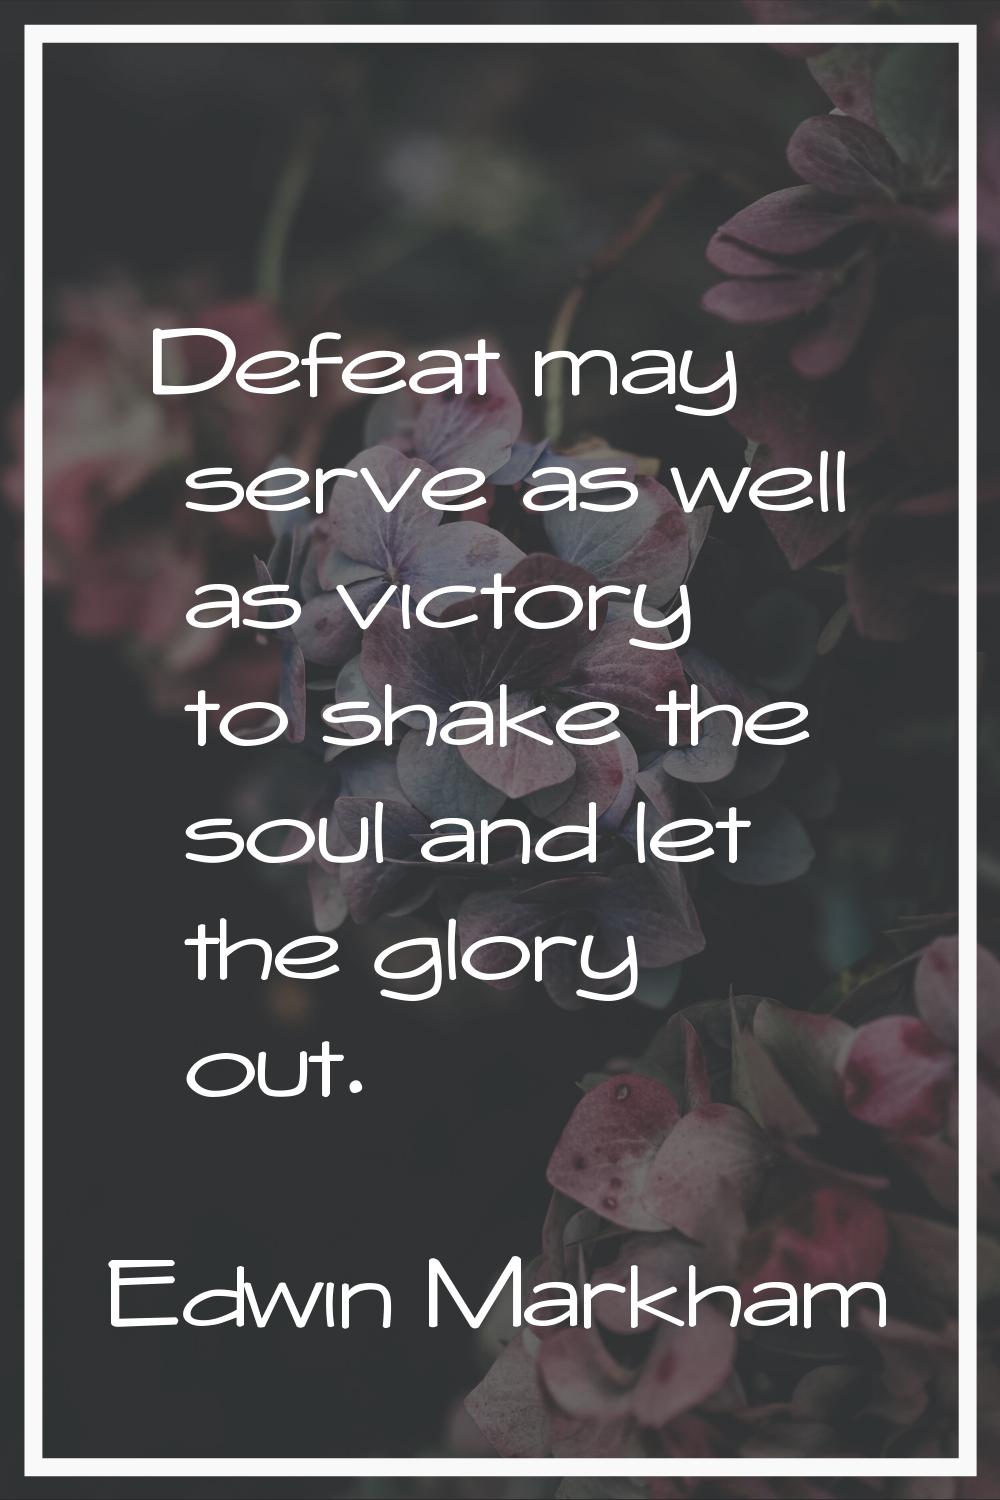 Defeat may serve as well as victory to shake the soul and let the glory out.